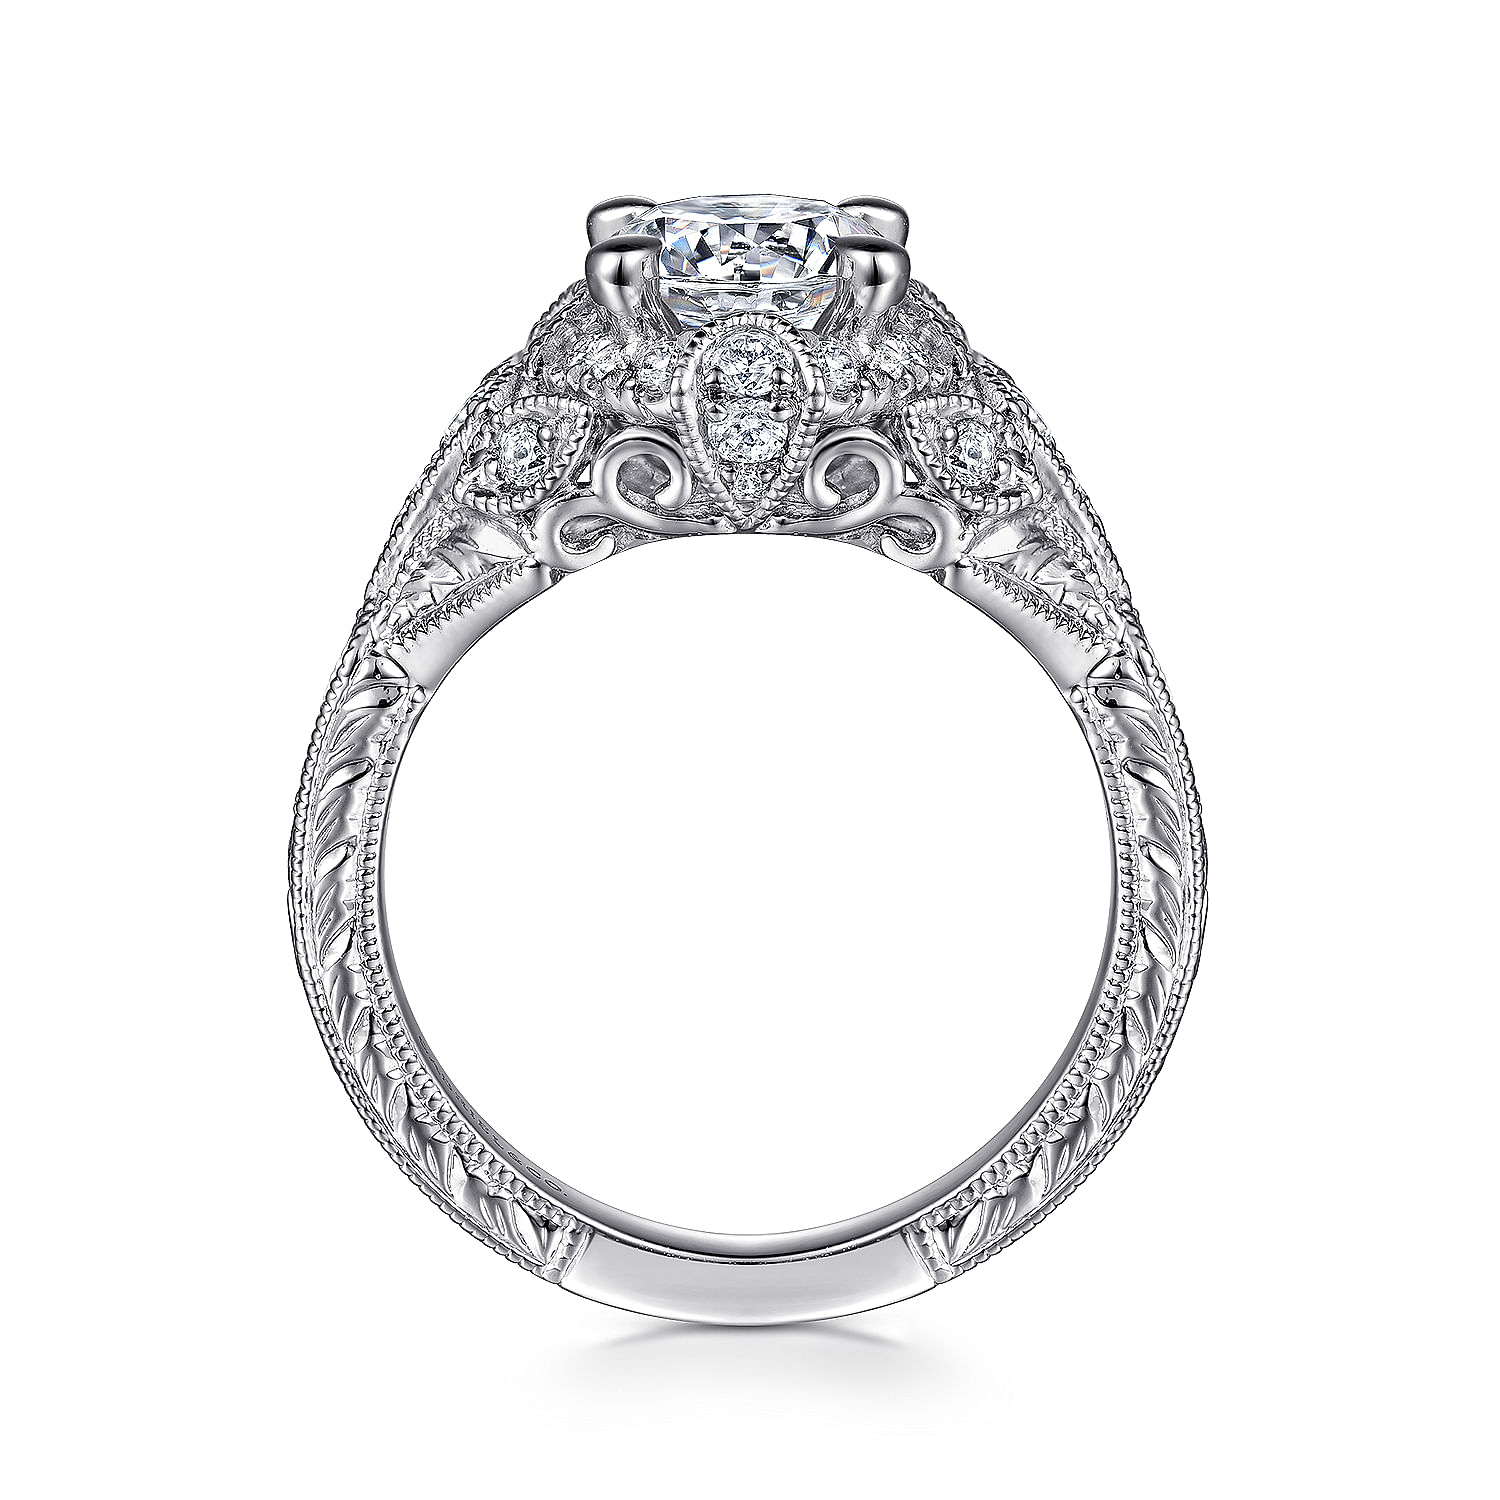 Annadale - Unique 14K White Gold Vintage Inspired Diamond Halo Engagement Ring - 0.35 ct - Shot 2